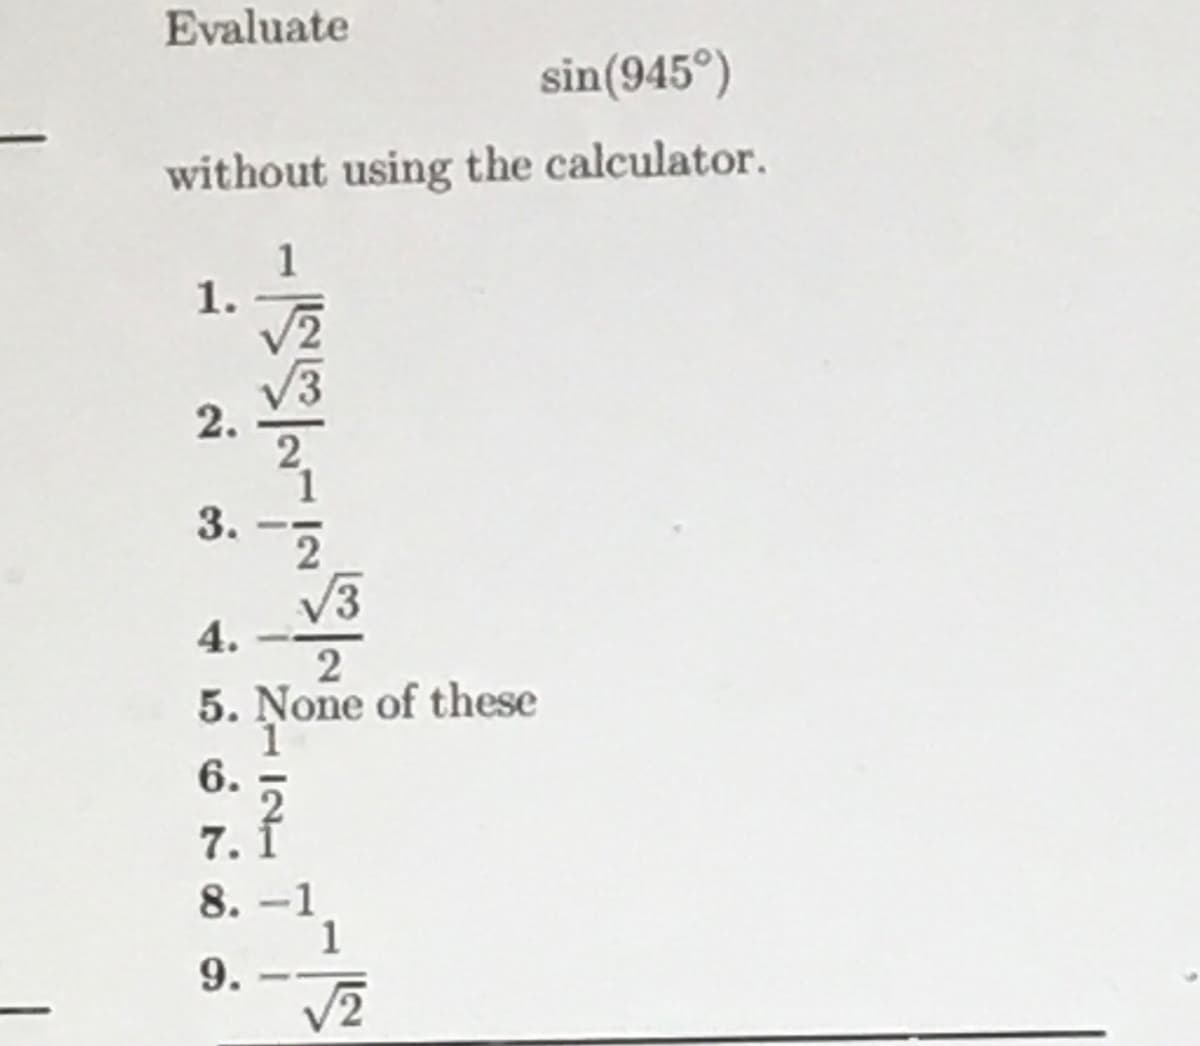 Evaluate
sin (945°)
without using the calculator.
1.
2.
3.
1
√2
√√3
4.
2
5. None of these
1
6.
7.1
8.-1
1
9.
√2